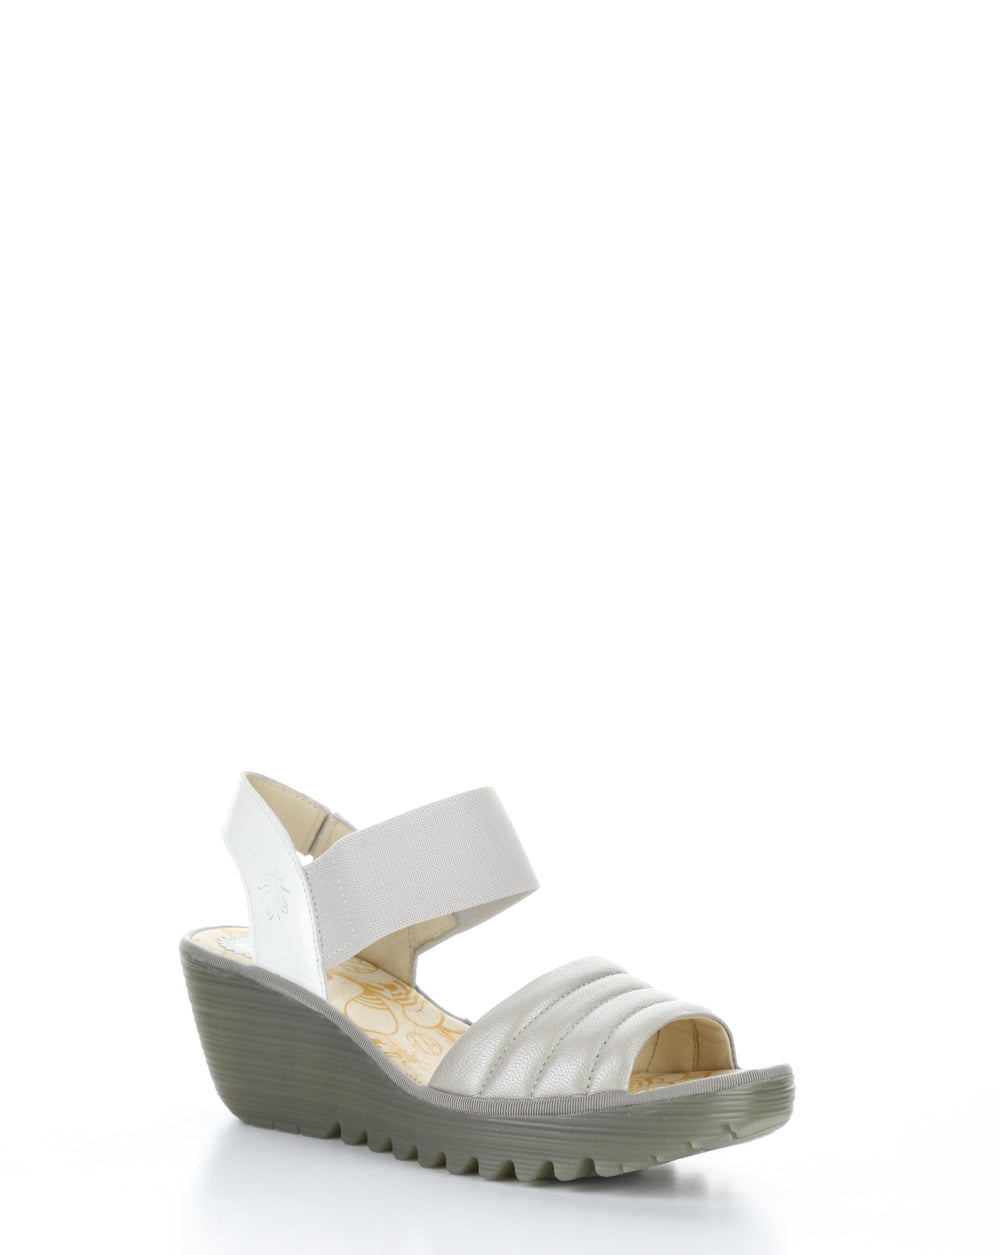 YIKO414FLY 001 SILVER/OFF WHITE Elasticated Sandals